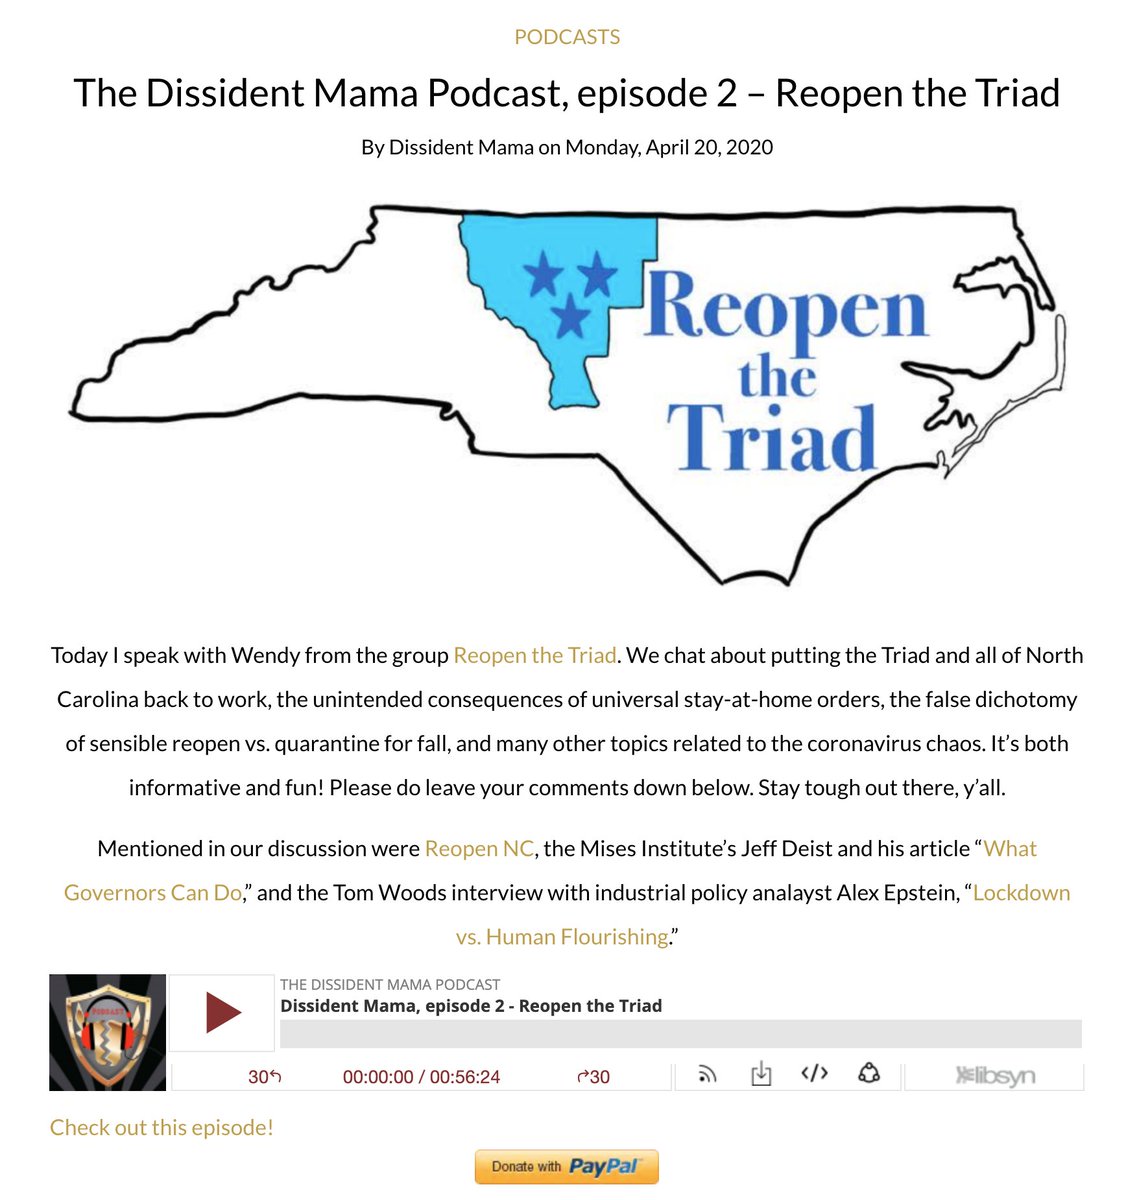 NEW: Another instance of a Re-Open group getting cozy w/ white supremacists. "Reopen the Triad" (NC) leader Wendy Rishel Konig appeared on the "Dissident Mama" podcast run by Rebecca Quate Dillingham, a racist, neo-Confederate blogger/podcaster (archive:  http://archive.is/tegLx )